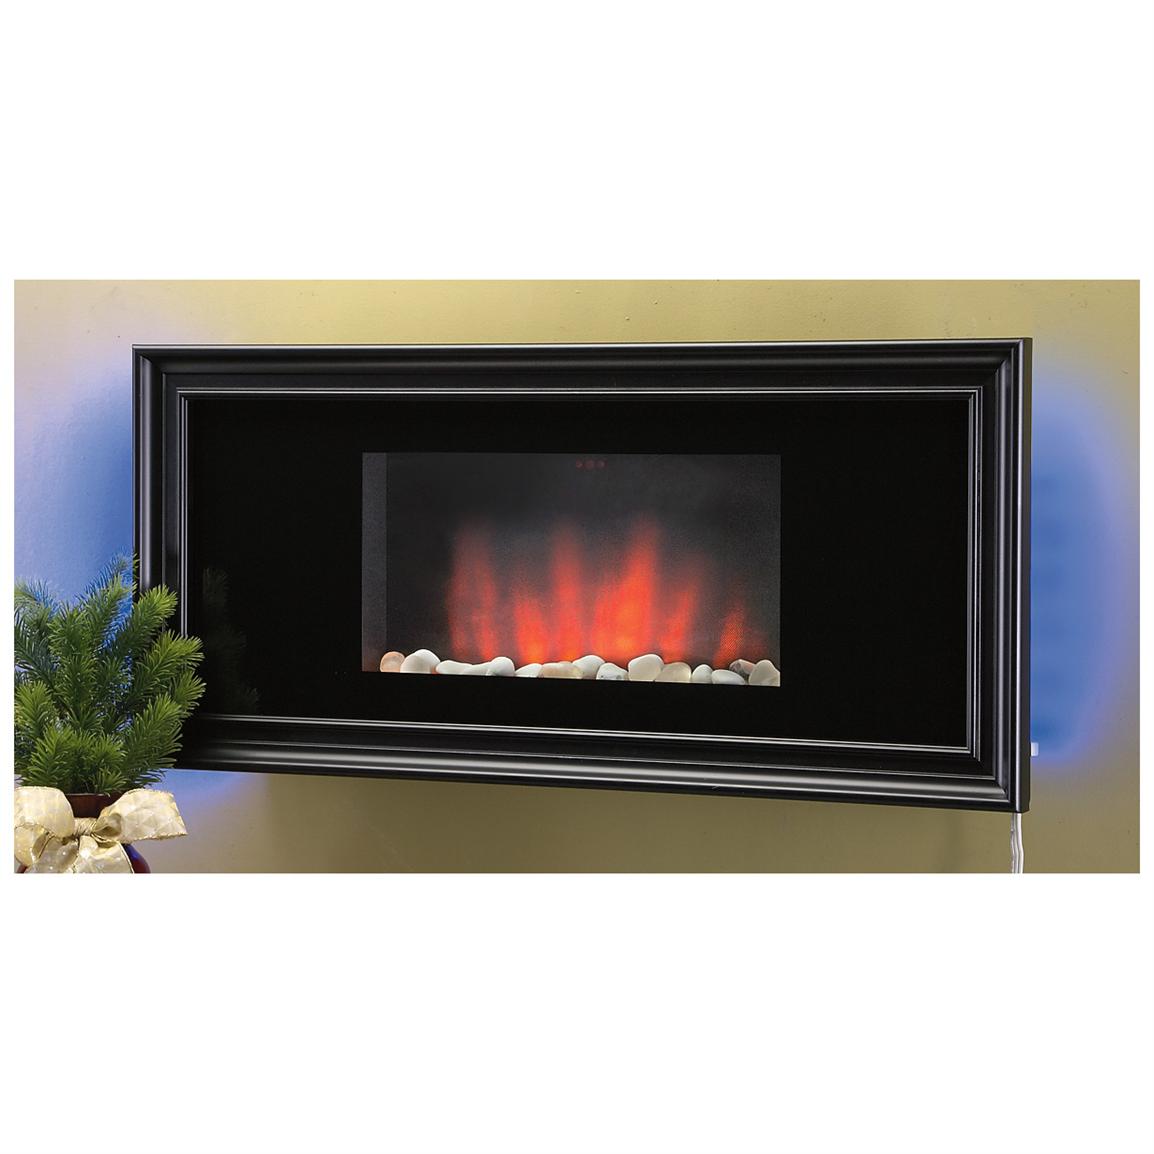 Wall Mount Electric Fireplace 232507, Fireplaces at Sportsman's Guide